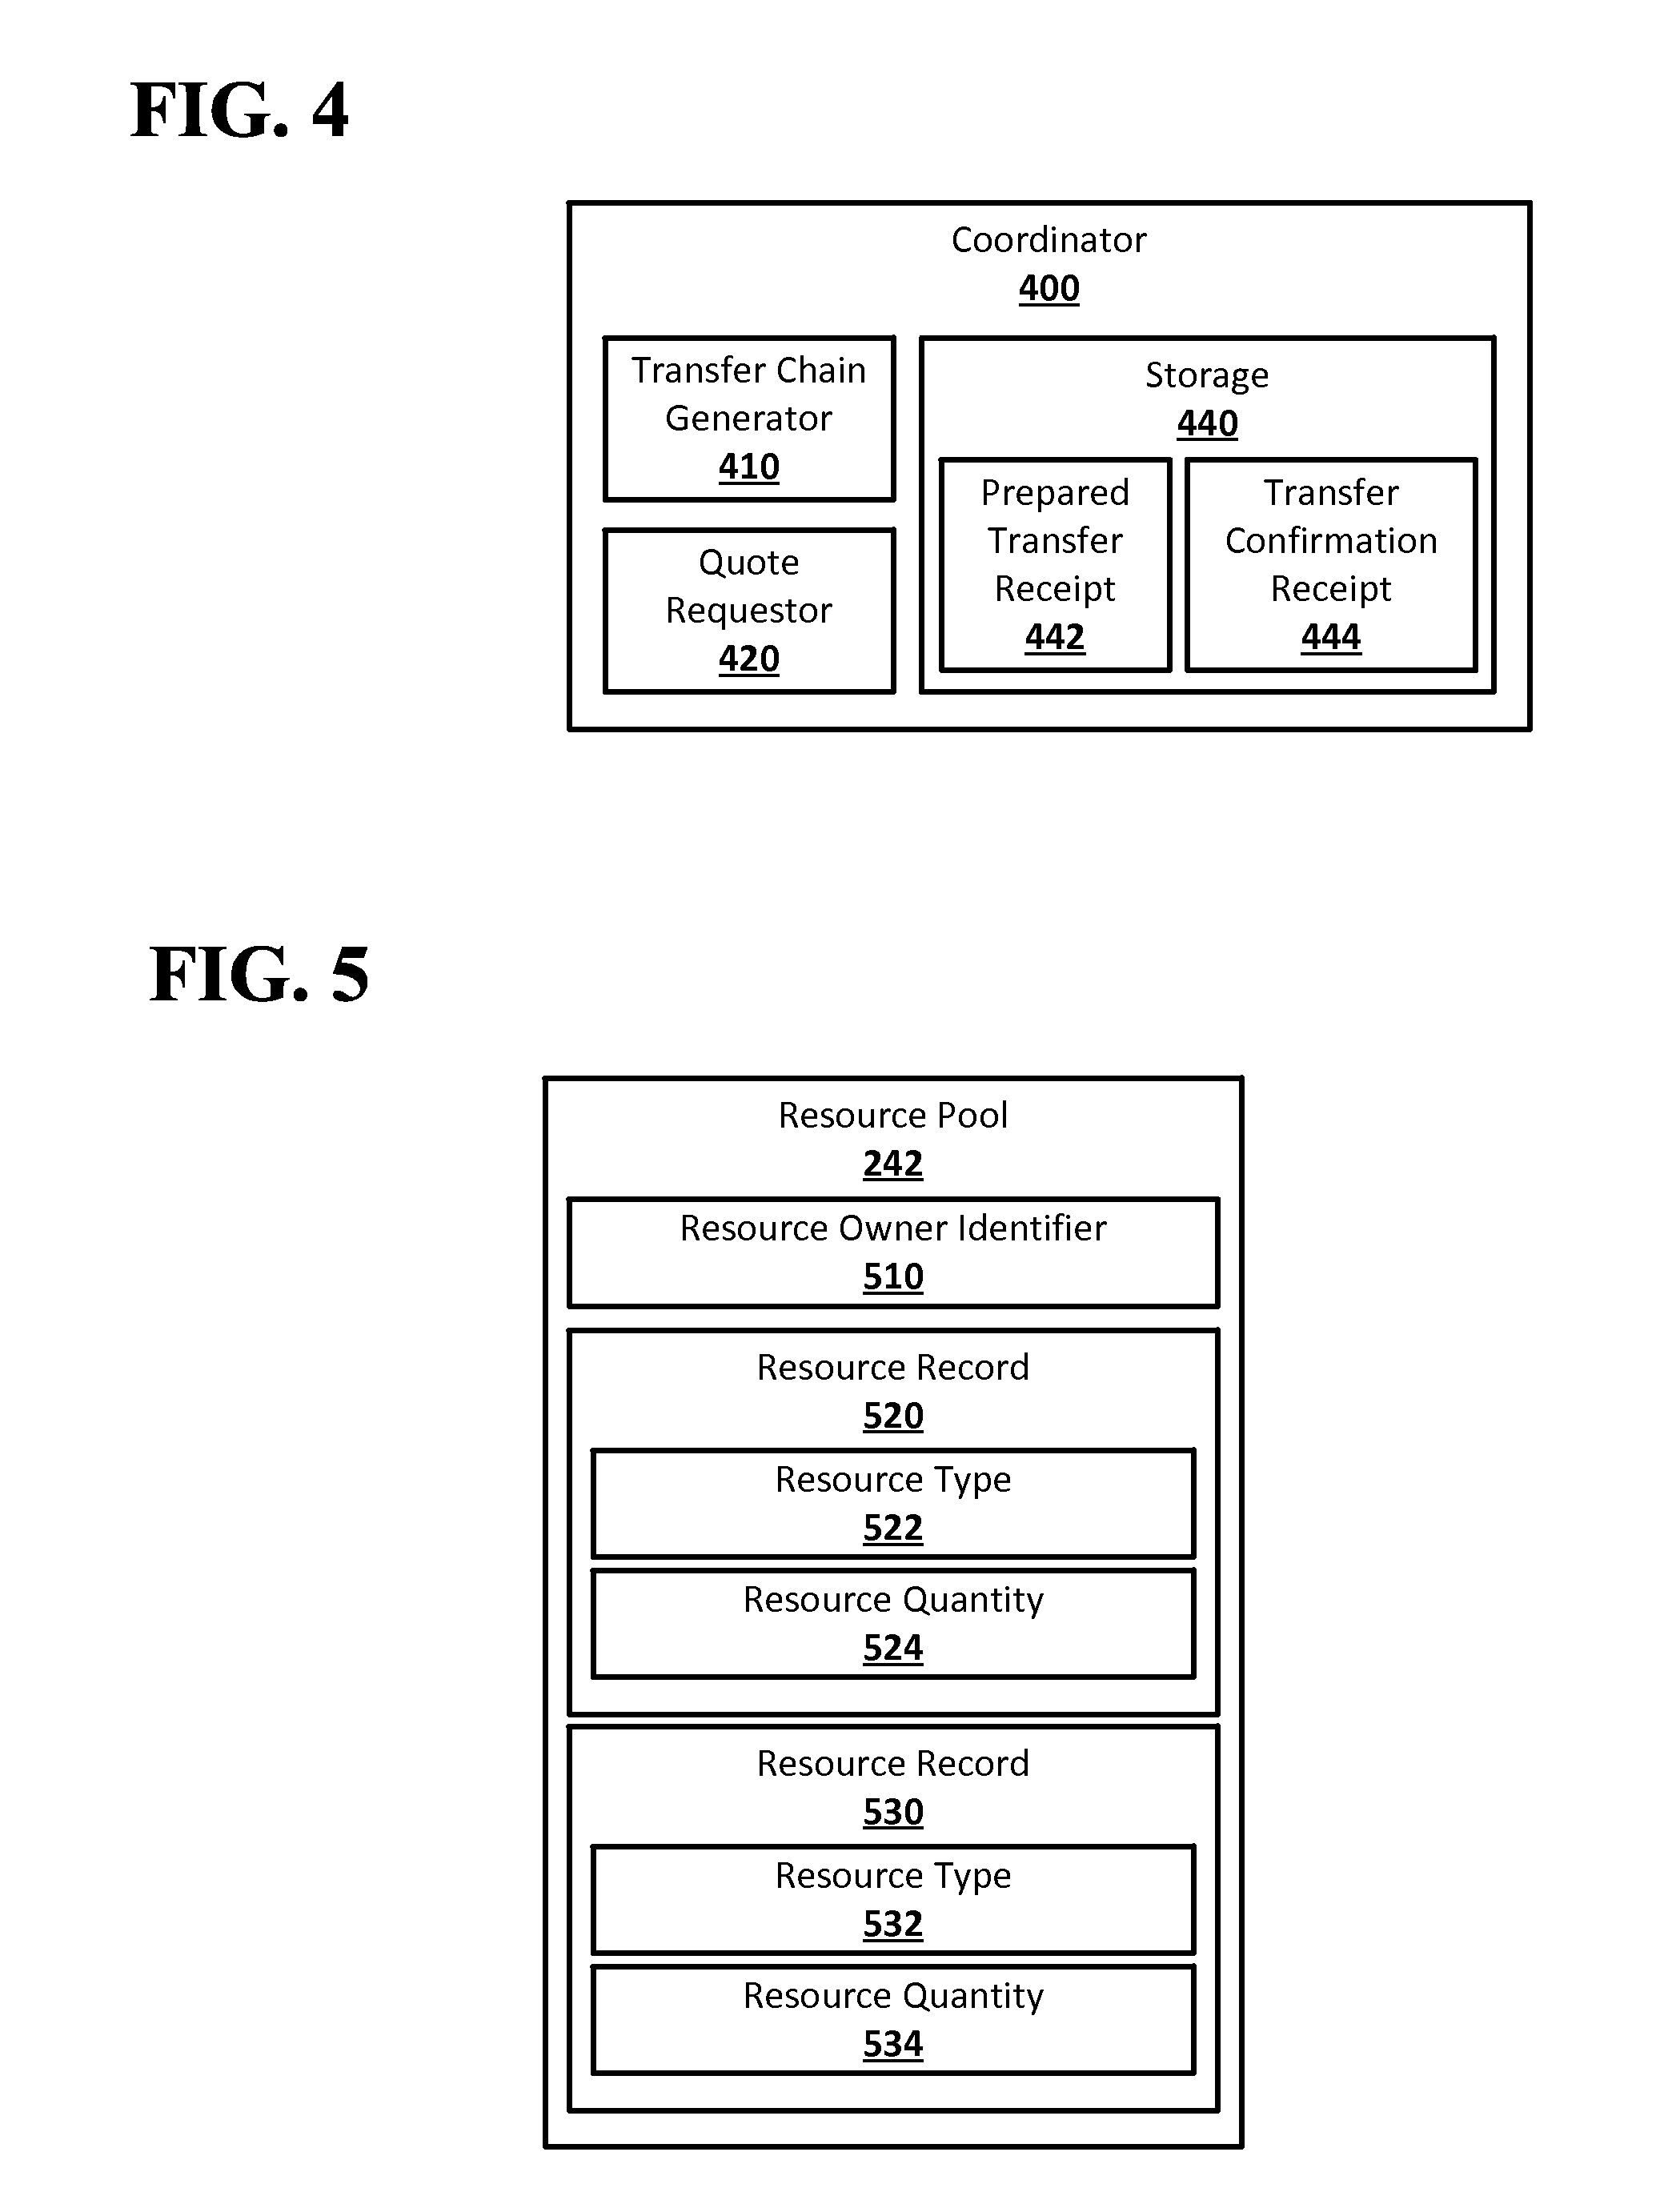 Private networks and content requests in a resource transfer system